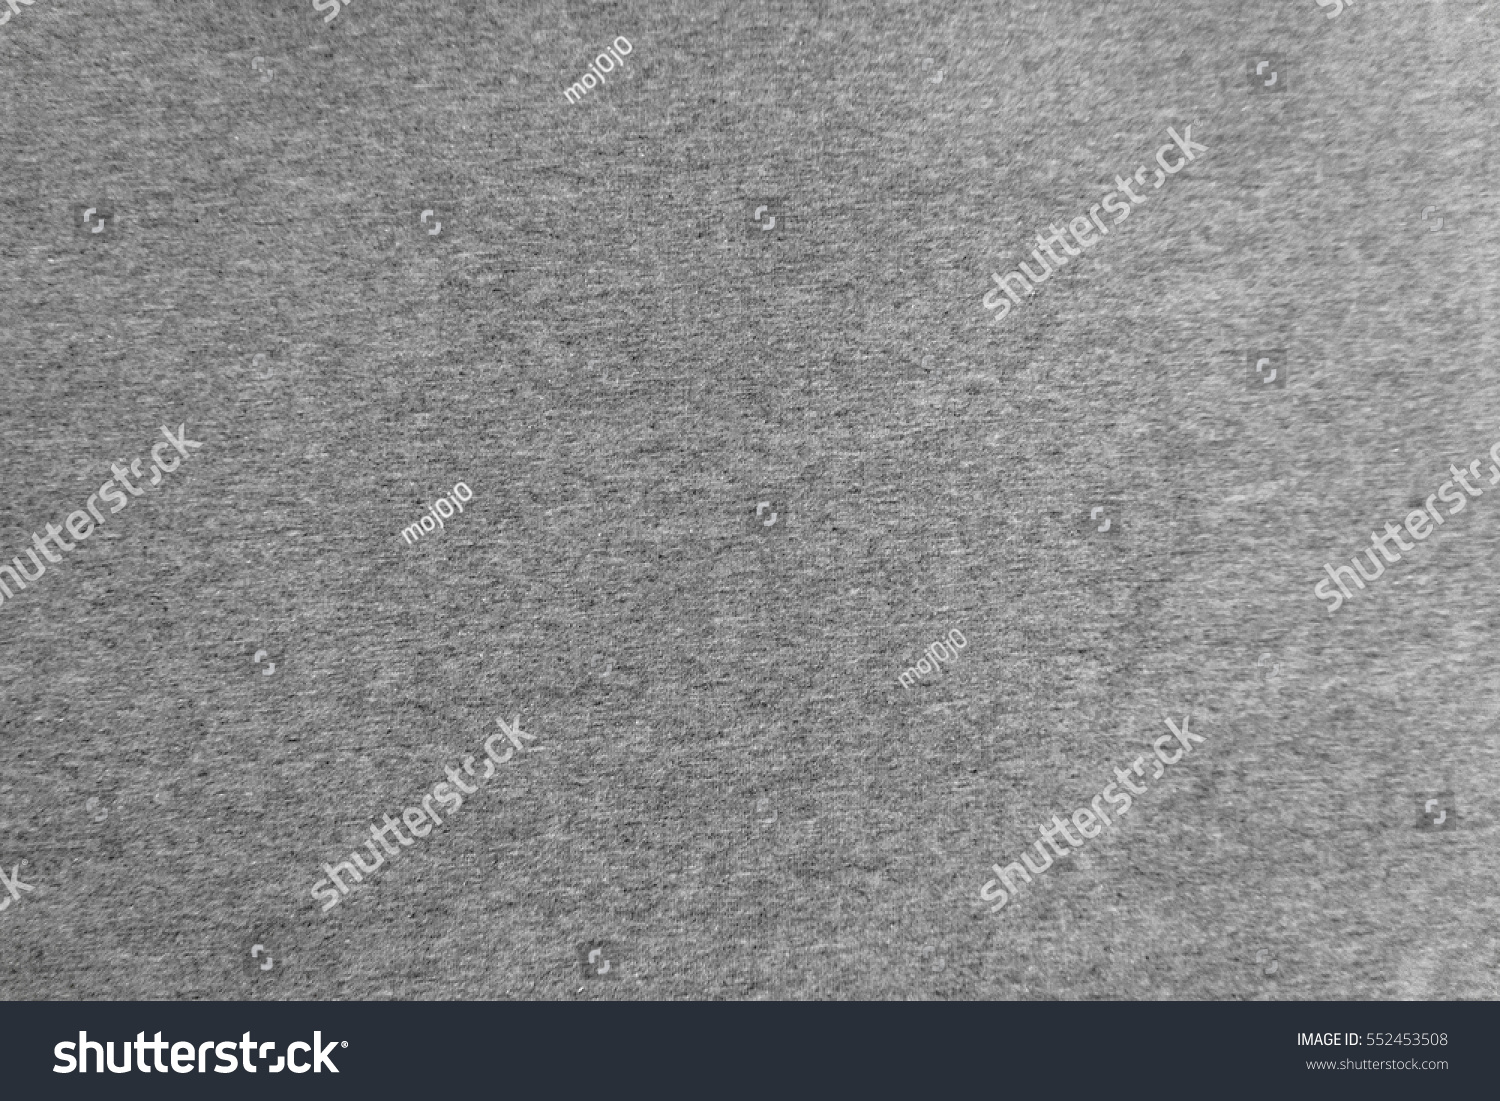 Grey cloth texture and background #552453508